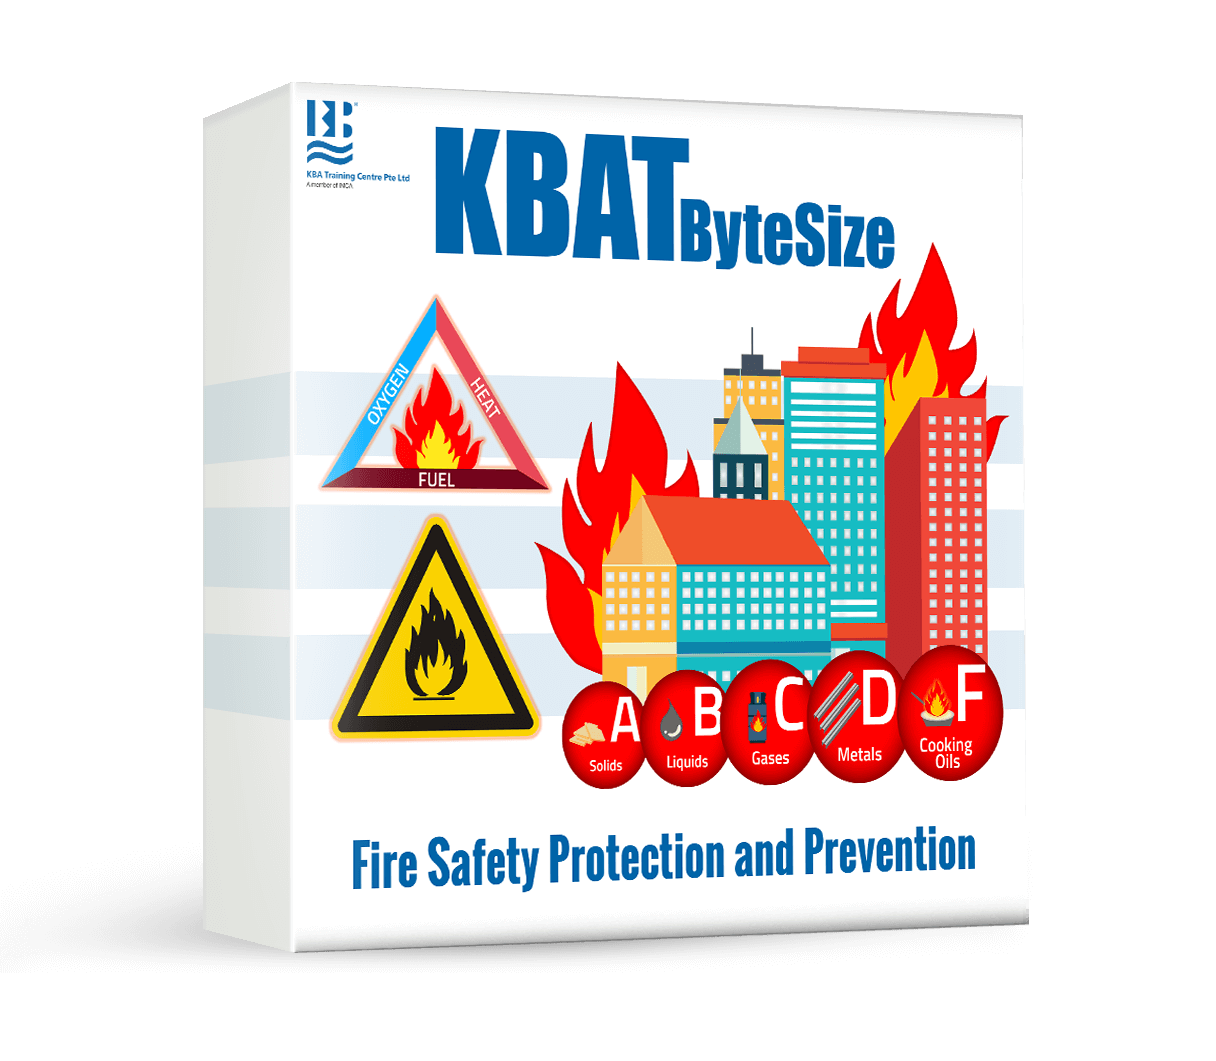 Fire Safety - Prevention and Protection